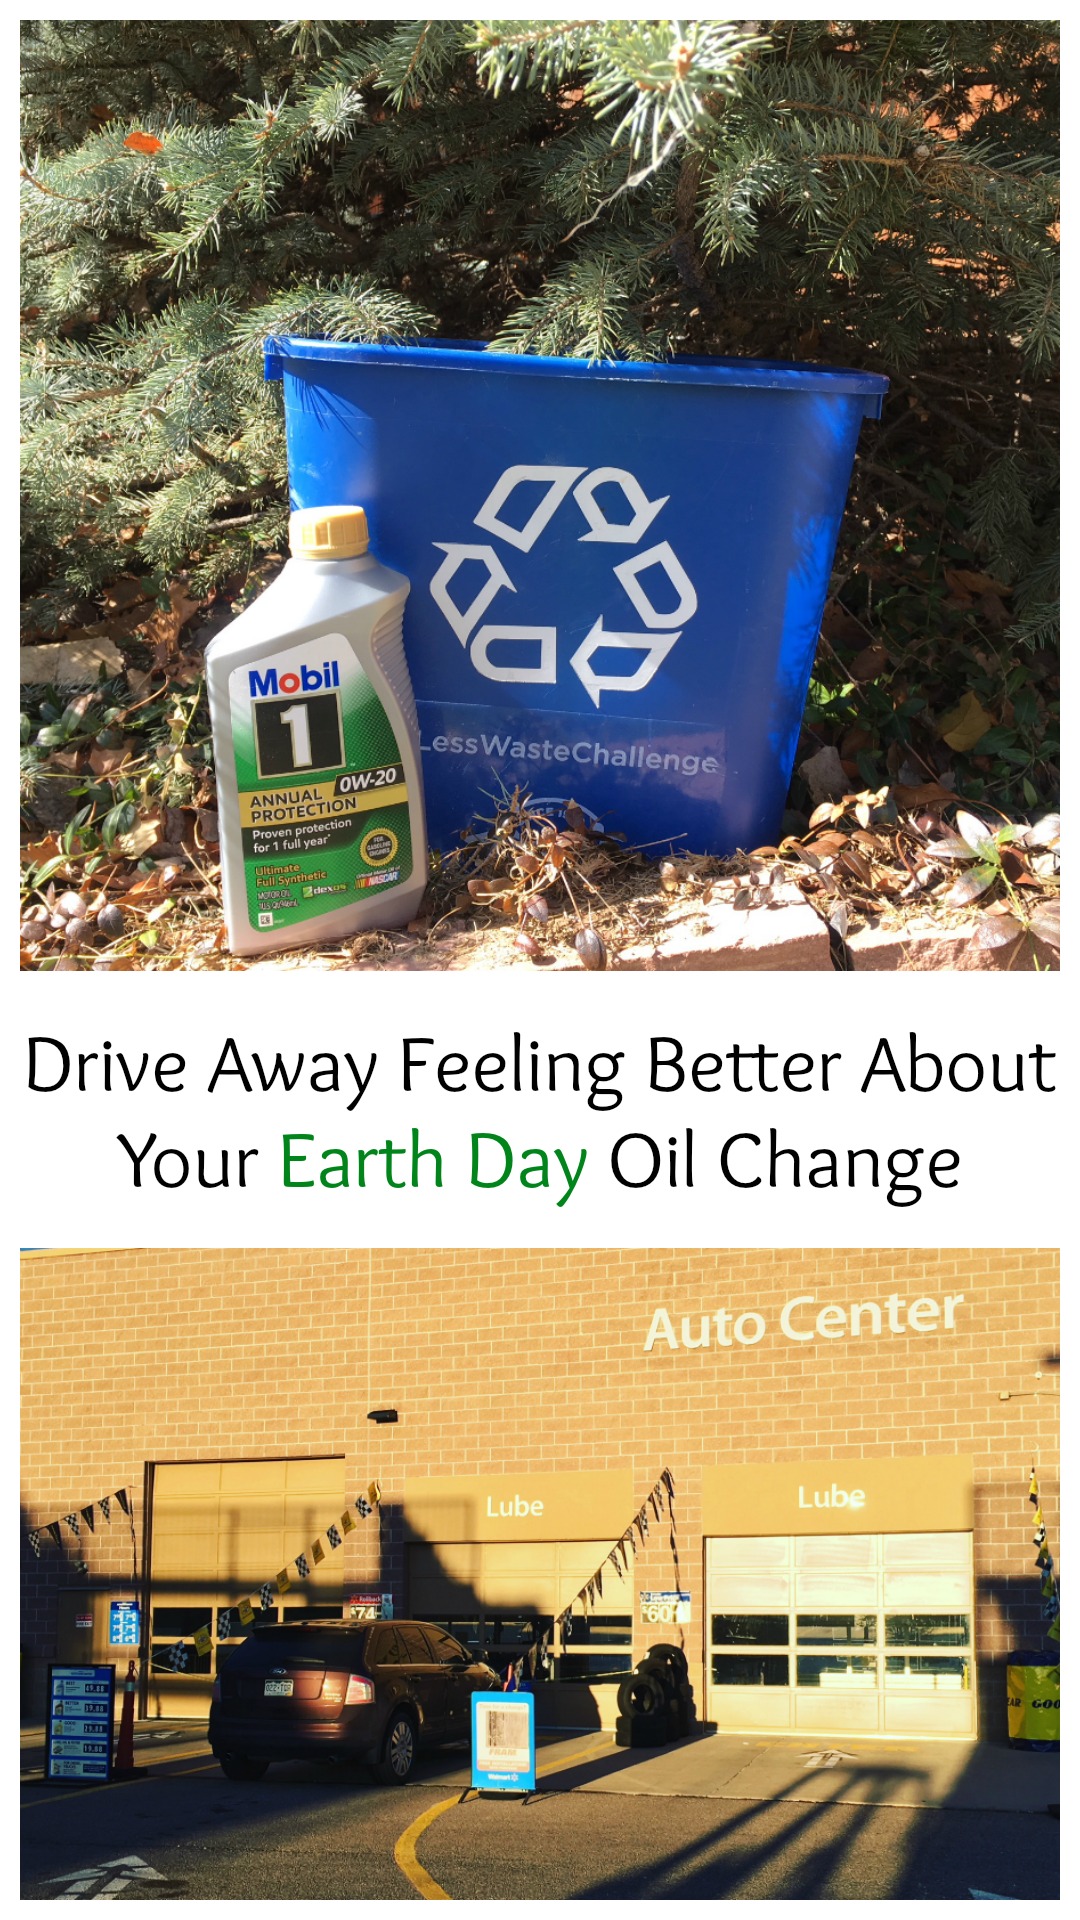 Drive Away Feeling Better About Your Earth Day Oil Change